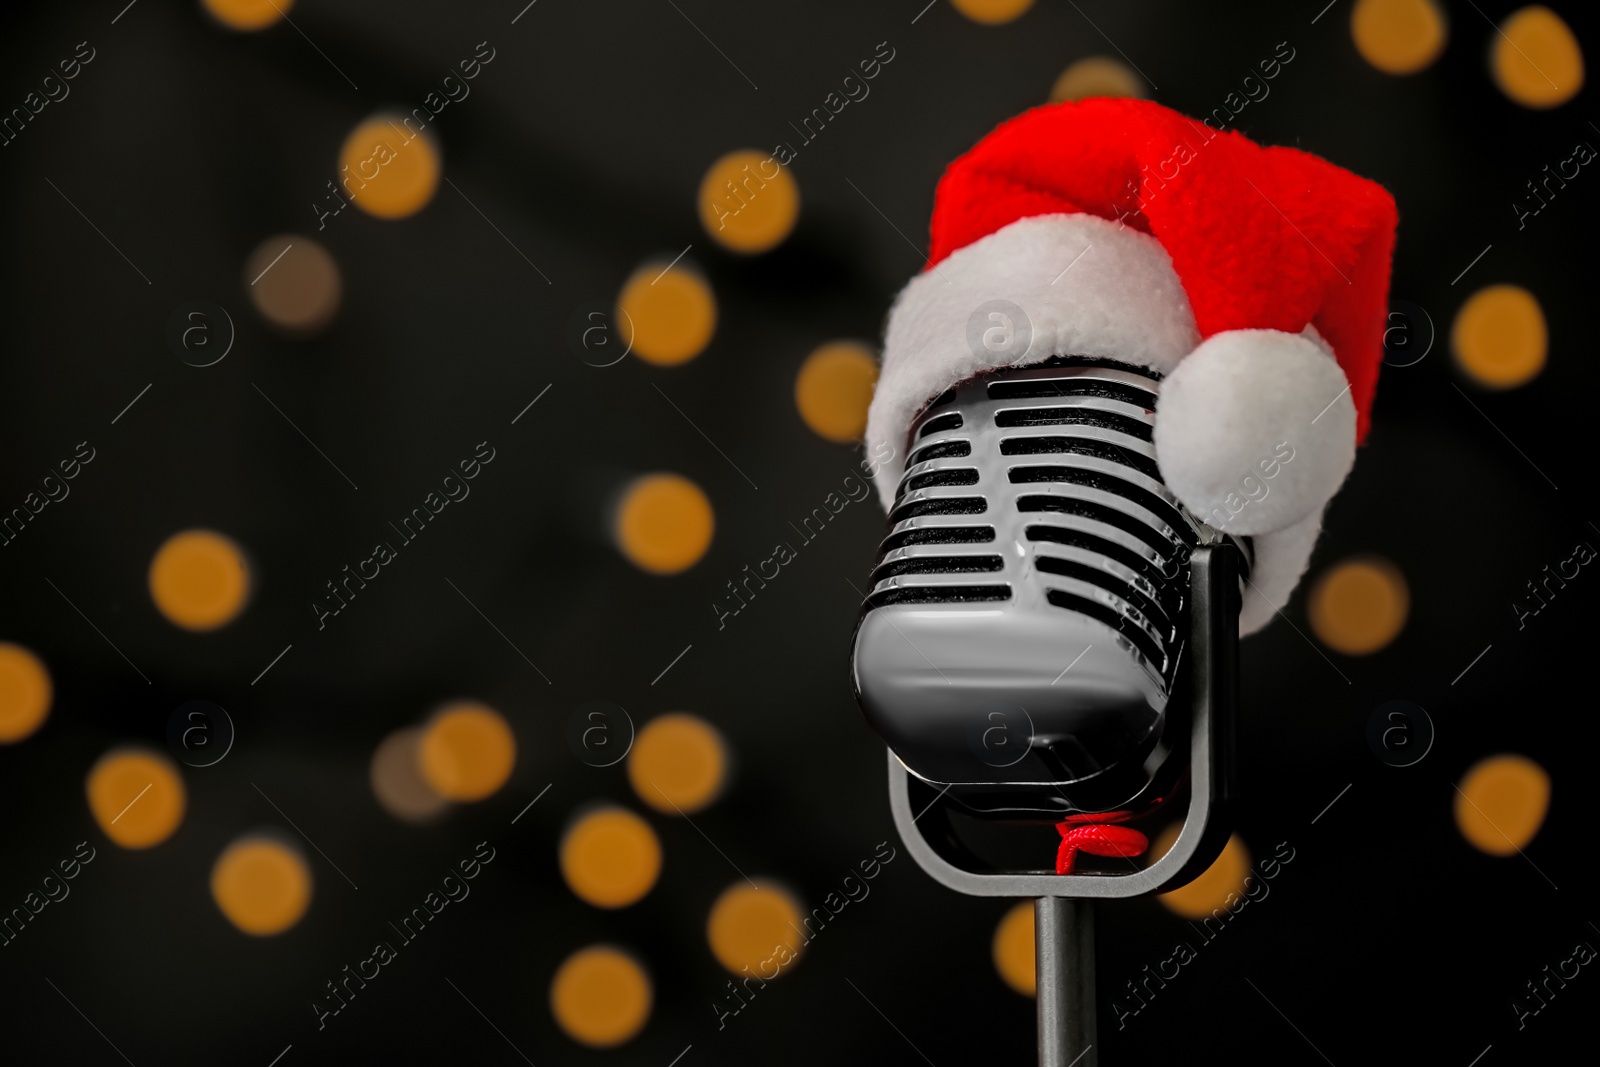 Photo of Retro microphone with Santa hat against blurred lights, space for text. Christmas music